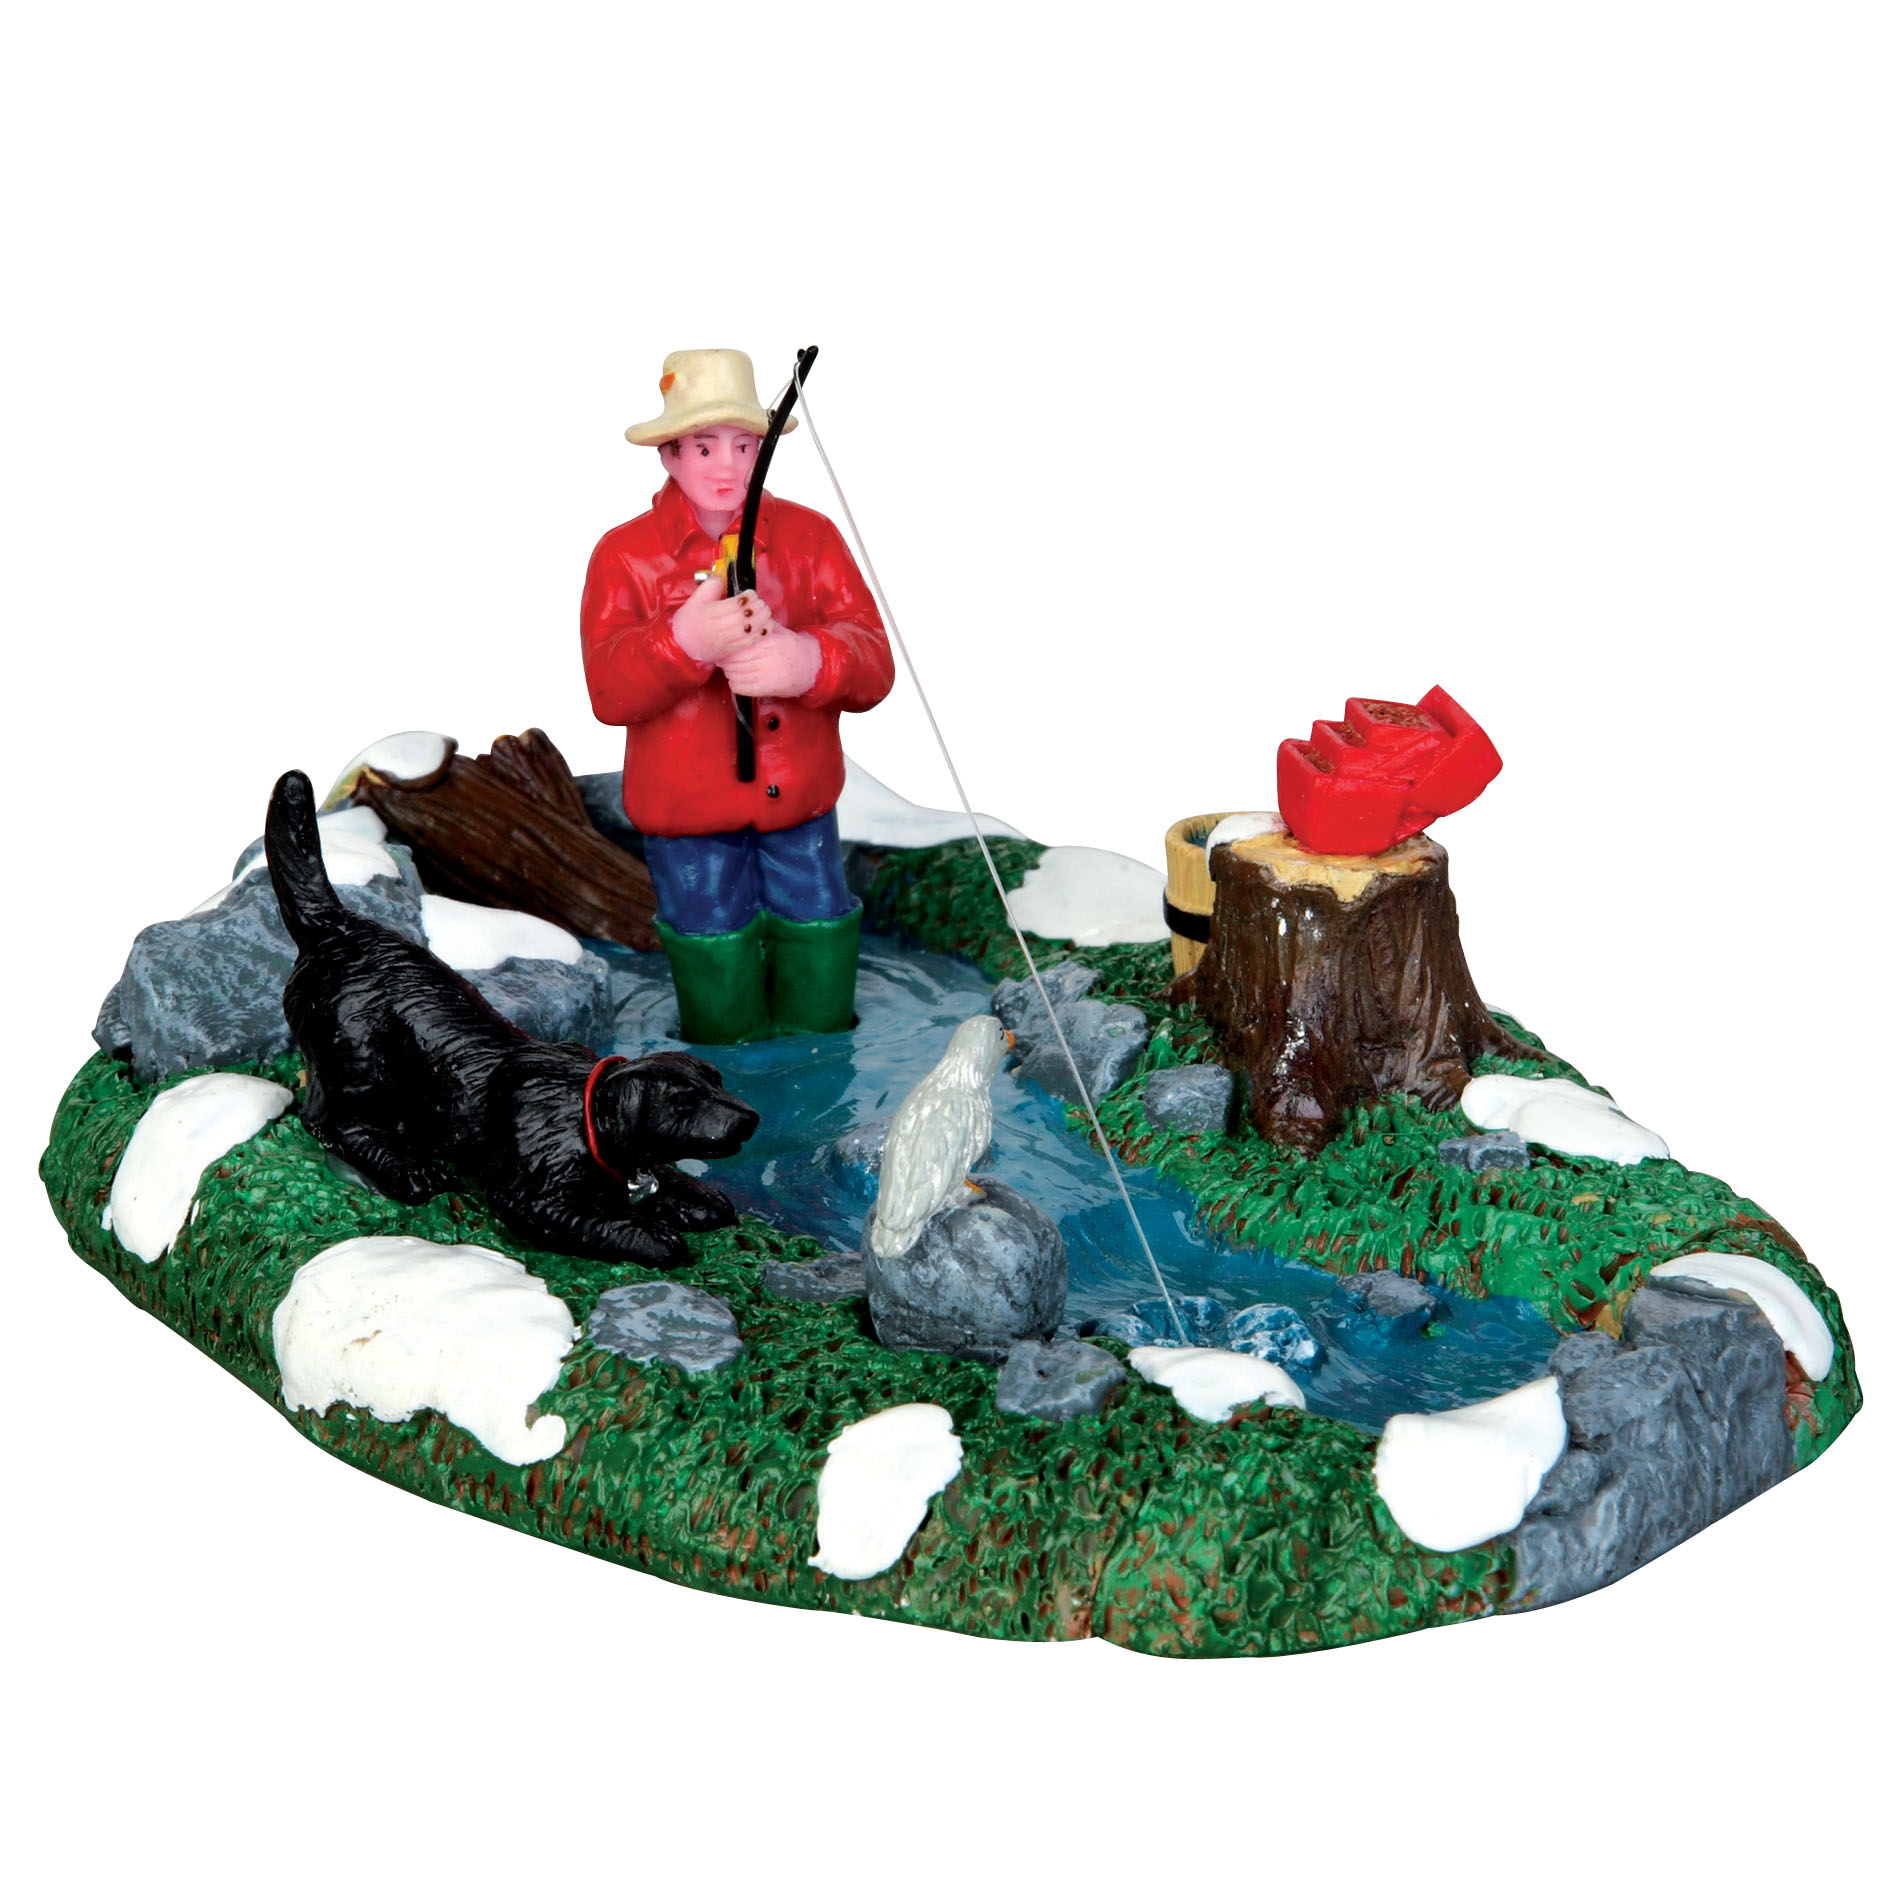 Lemax Village Collection Christmas Village Accessory, Stream Fishing